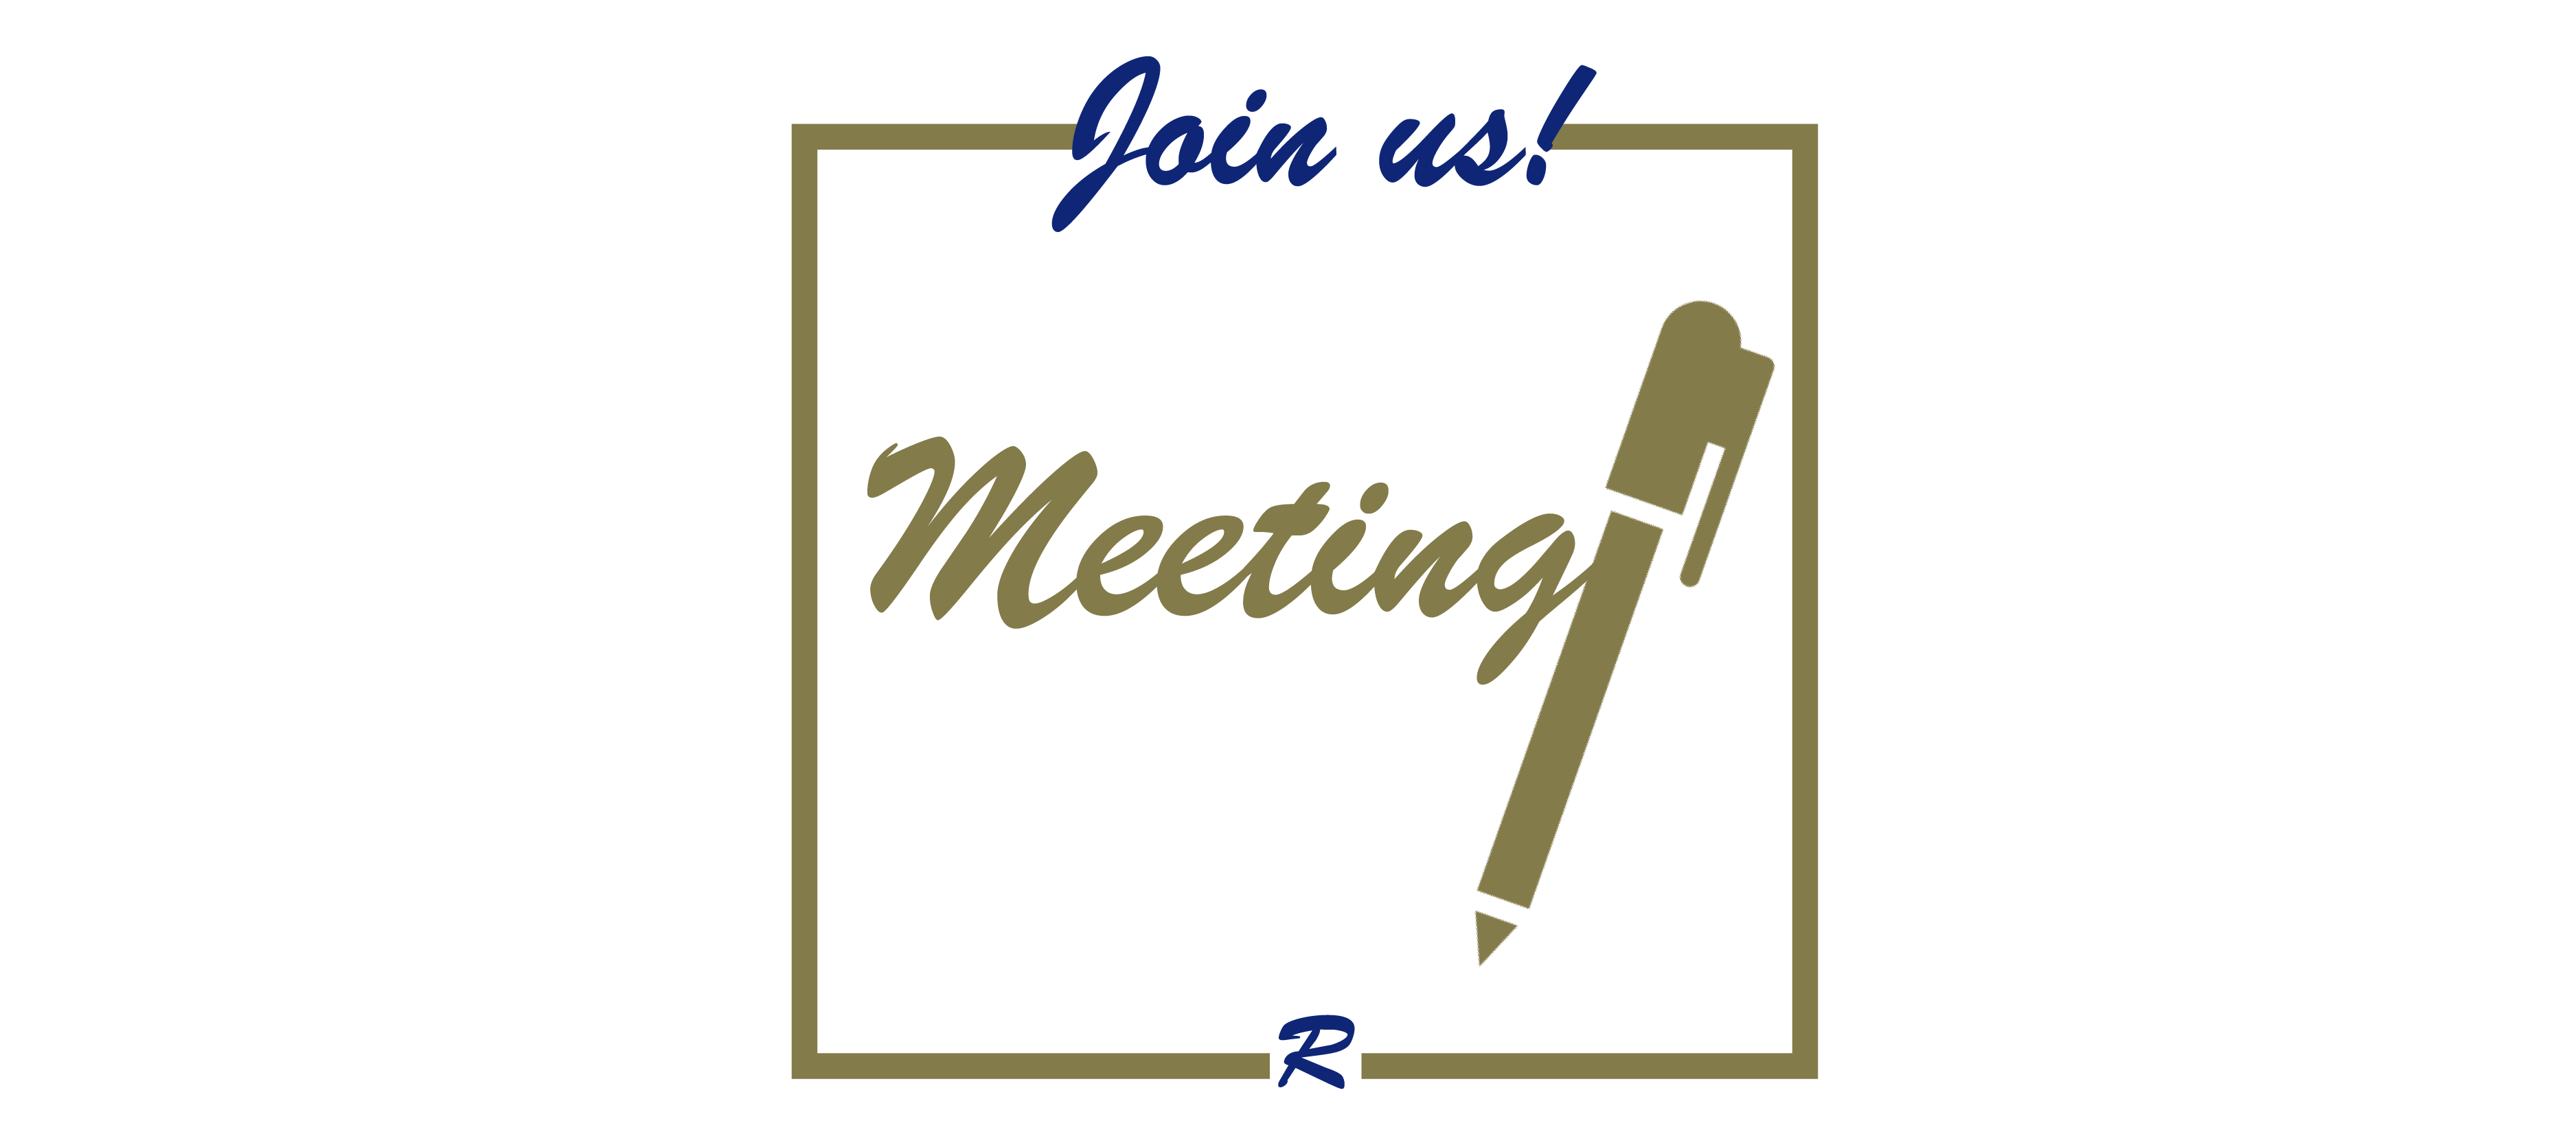 rcoc-meeting-events